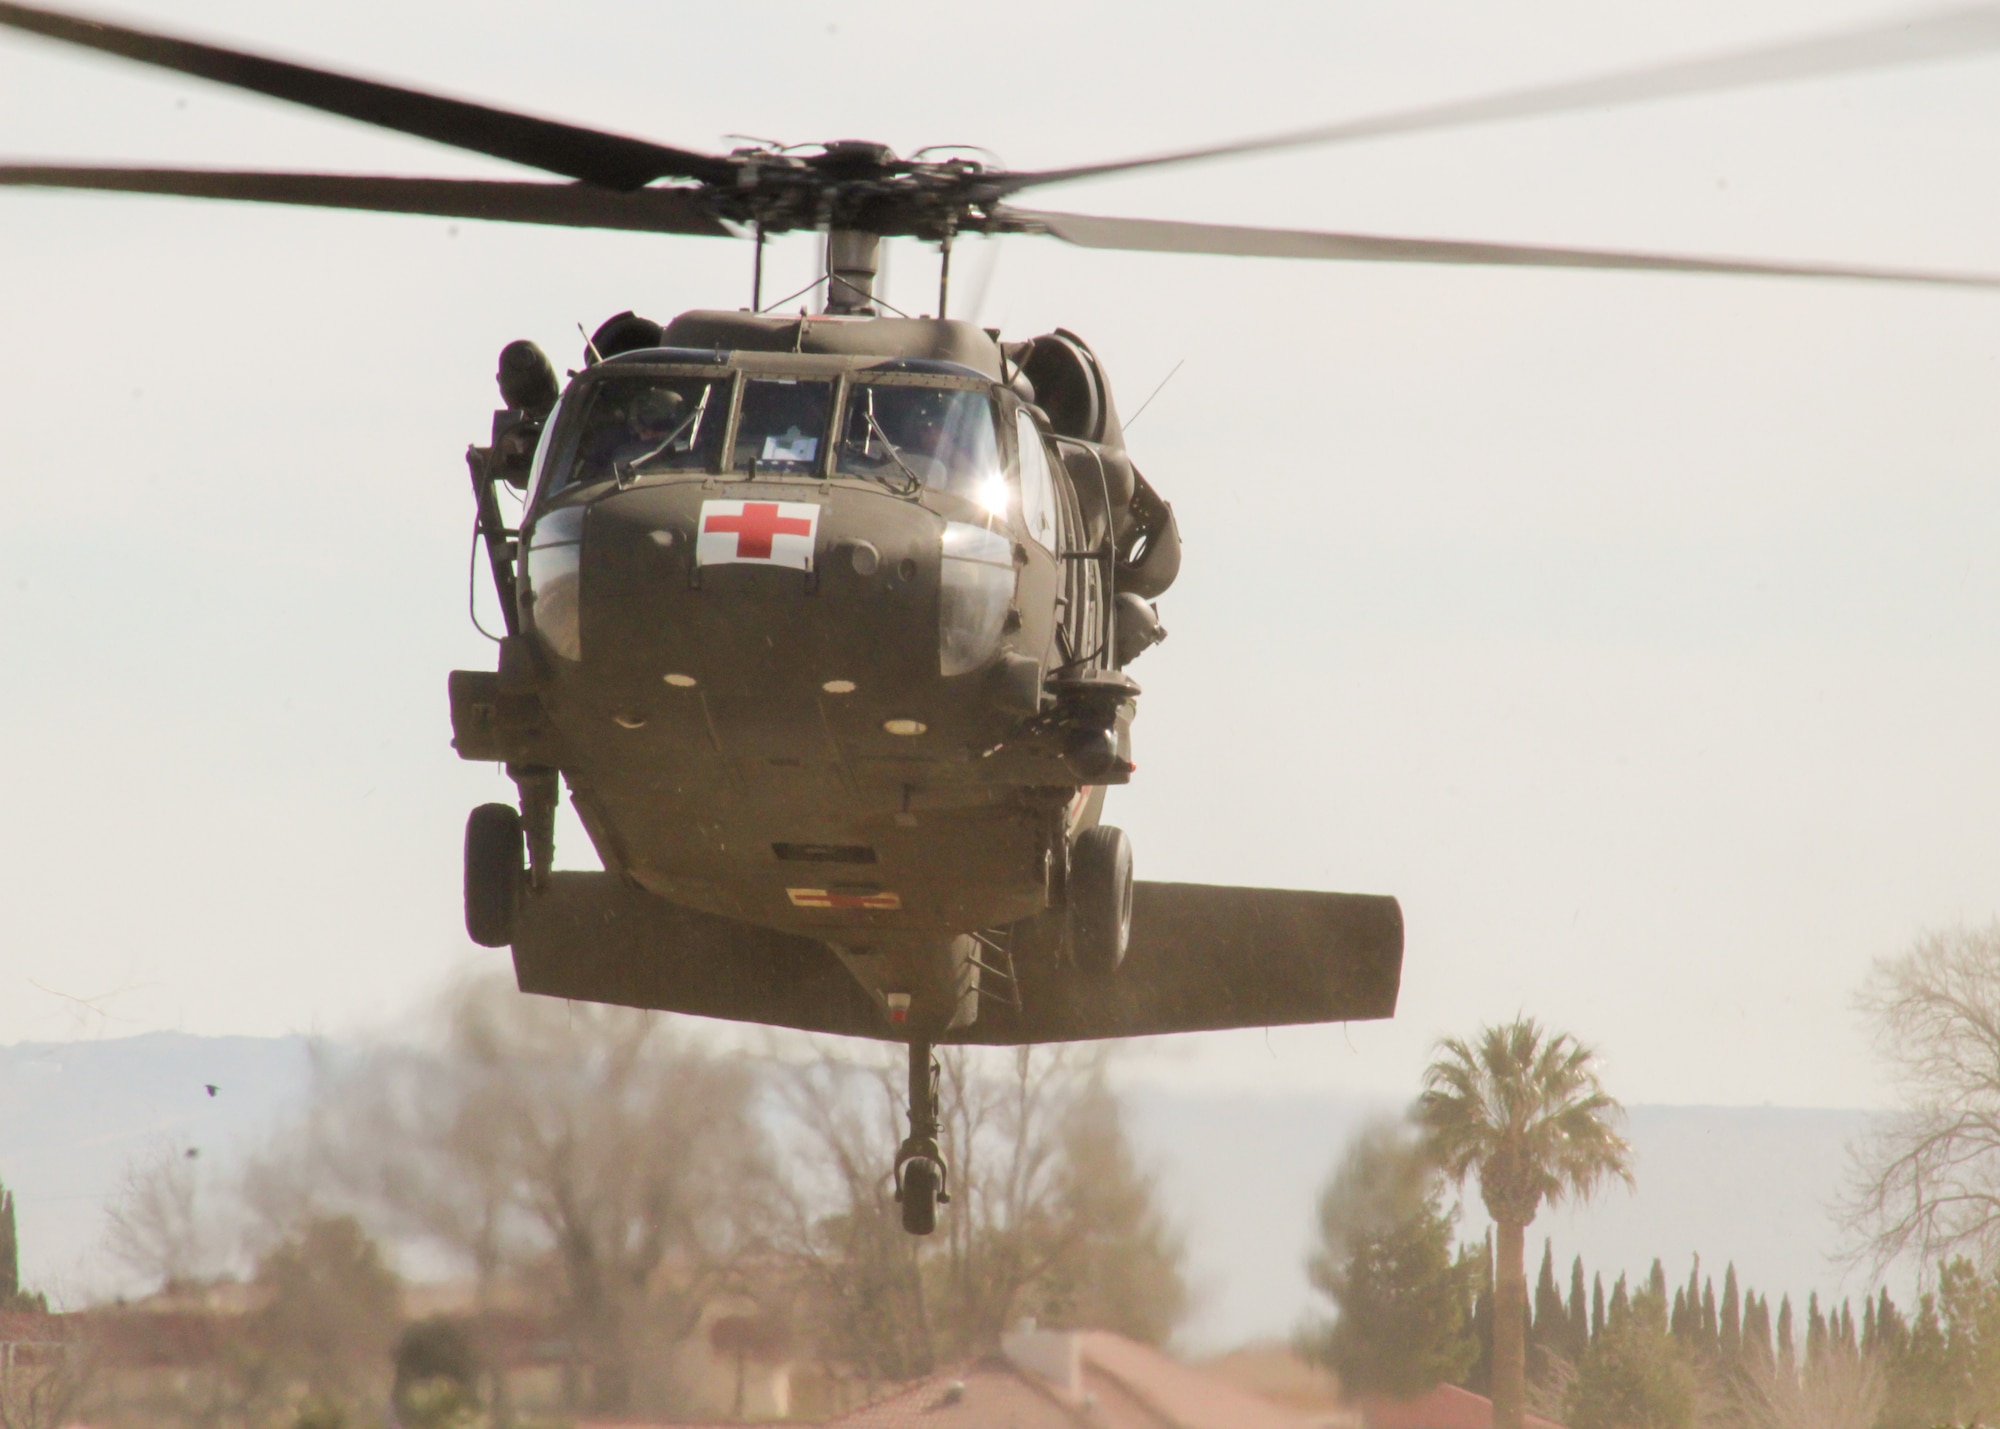 A UH-60 Blackhawk helicopter assigned to Charlie Company, 2916th Aviation Battalion, 916th Support Brigade, lands at Edwards Air Force Base, California, March 3. The Army unit trained with medical personnel from the 412th Medical Group on proper medevac procedures. (Air Force photo by Laura Maples)